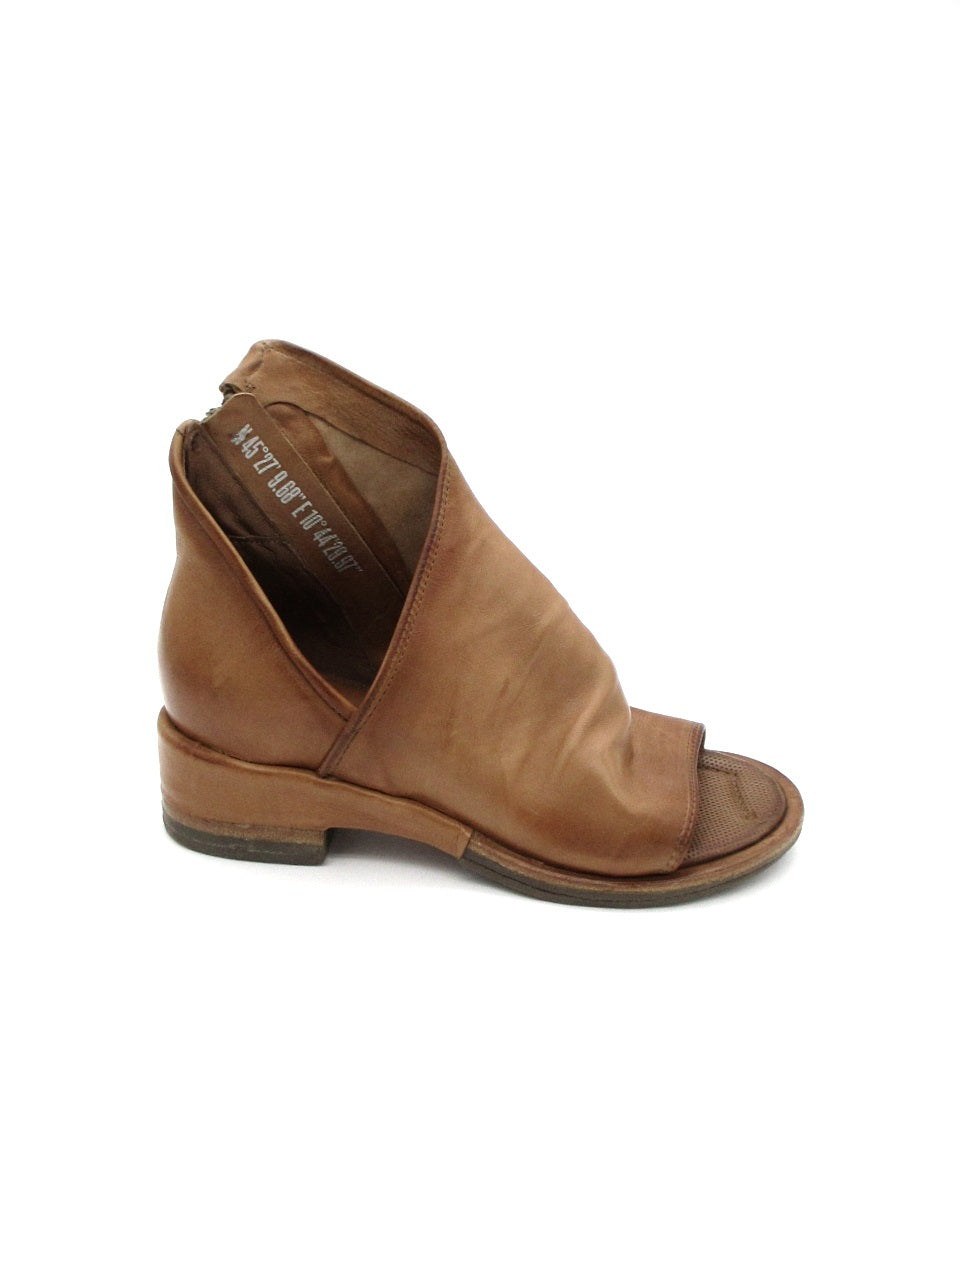 Sandalo tacco in pelle donna As98 A70004 Camel